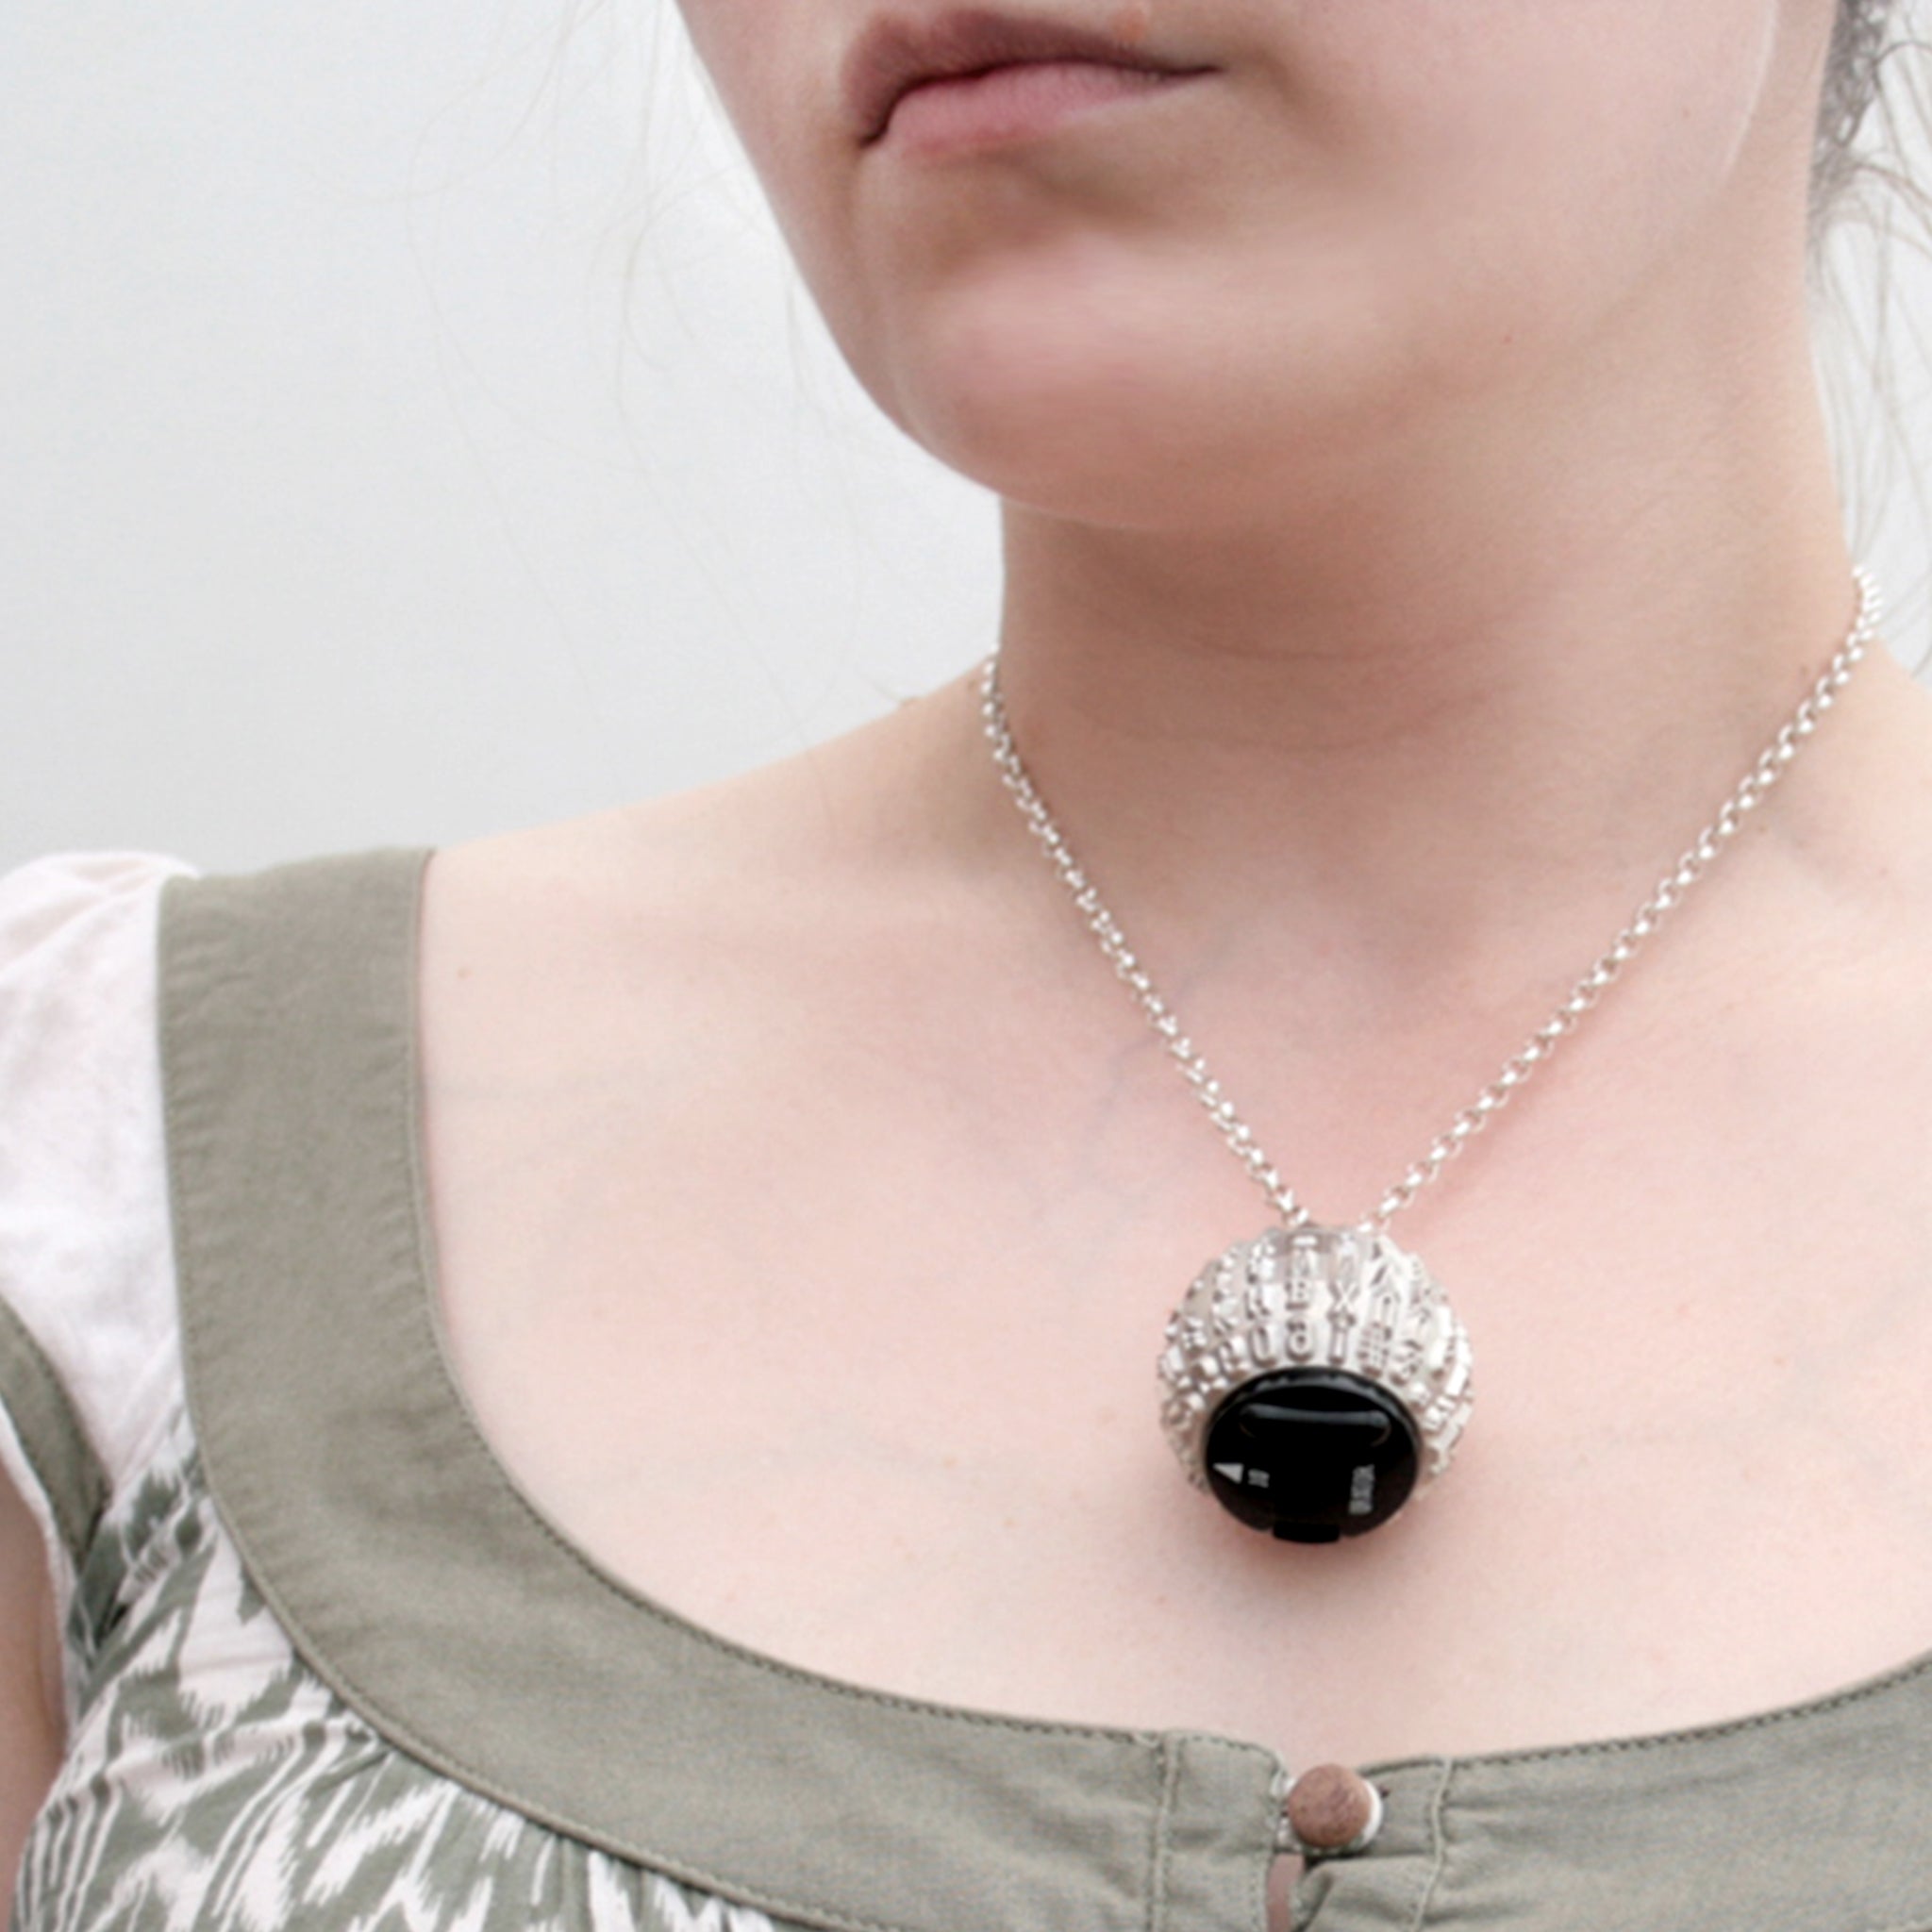 IBM Selectric typeball with sterling silver bead turned into quirky necklace worn by a model